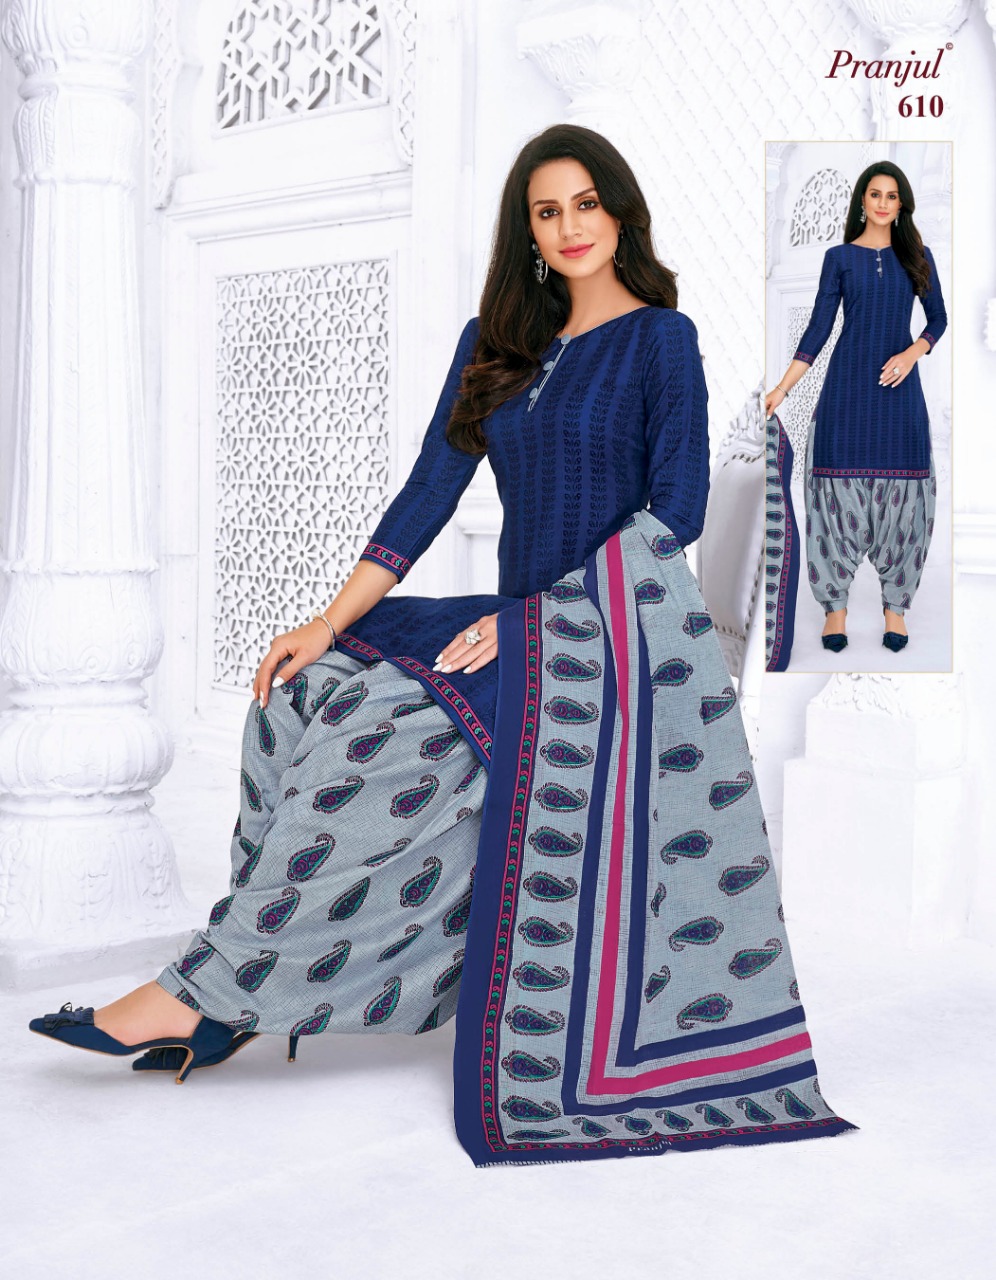 Buy Pranjul cotton unstitched dress material 2830 Online at Low Prices in  India at Bigdeals24x7.com